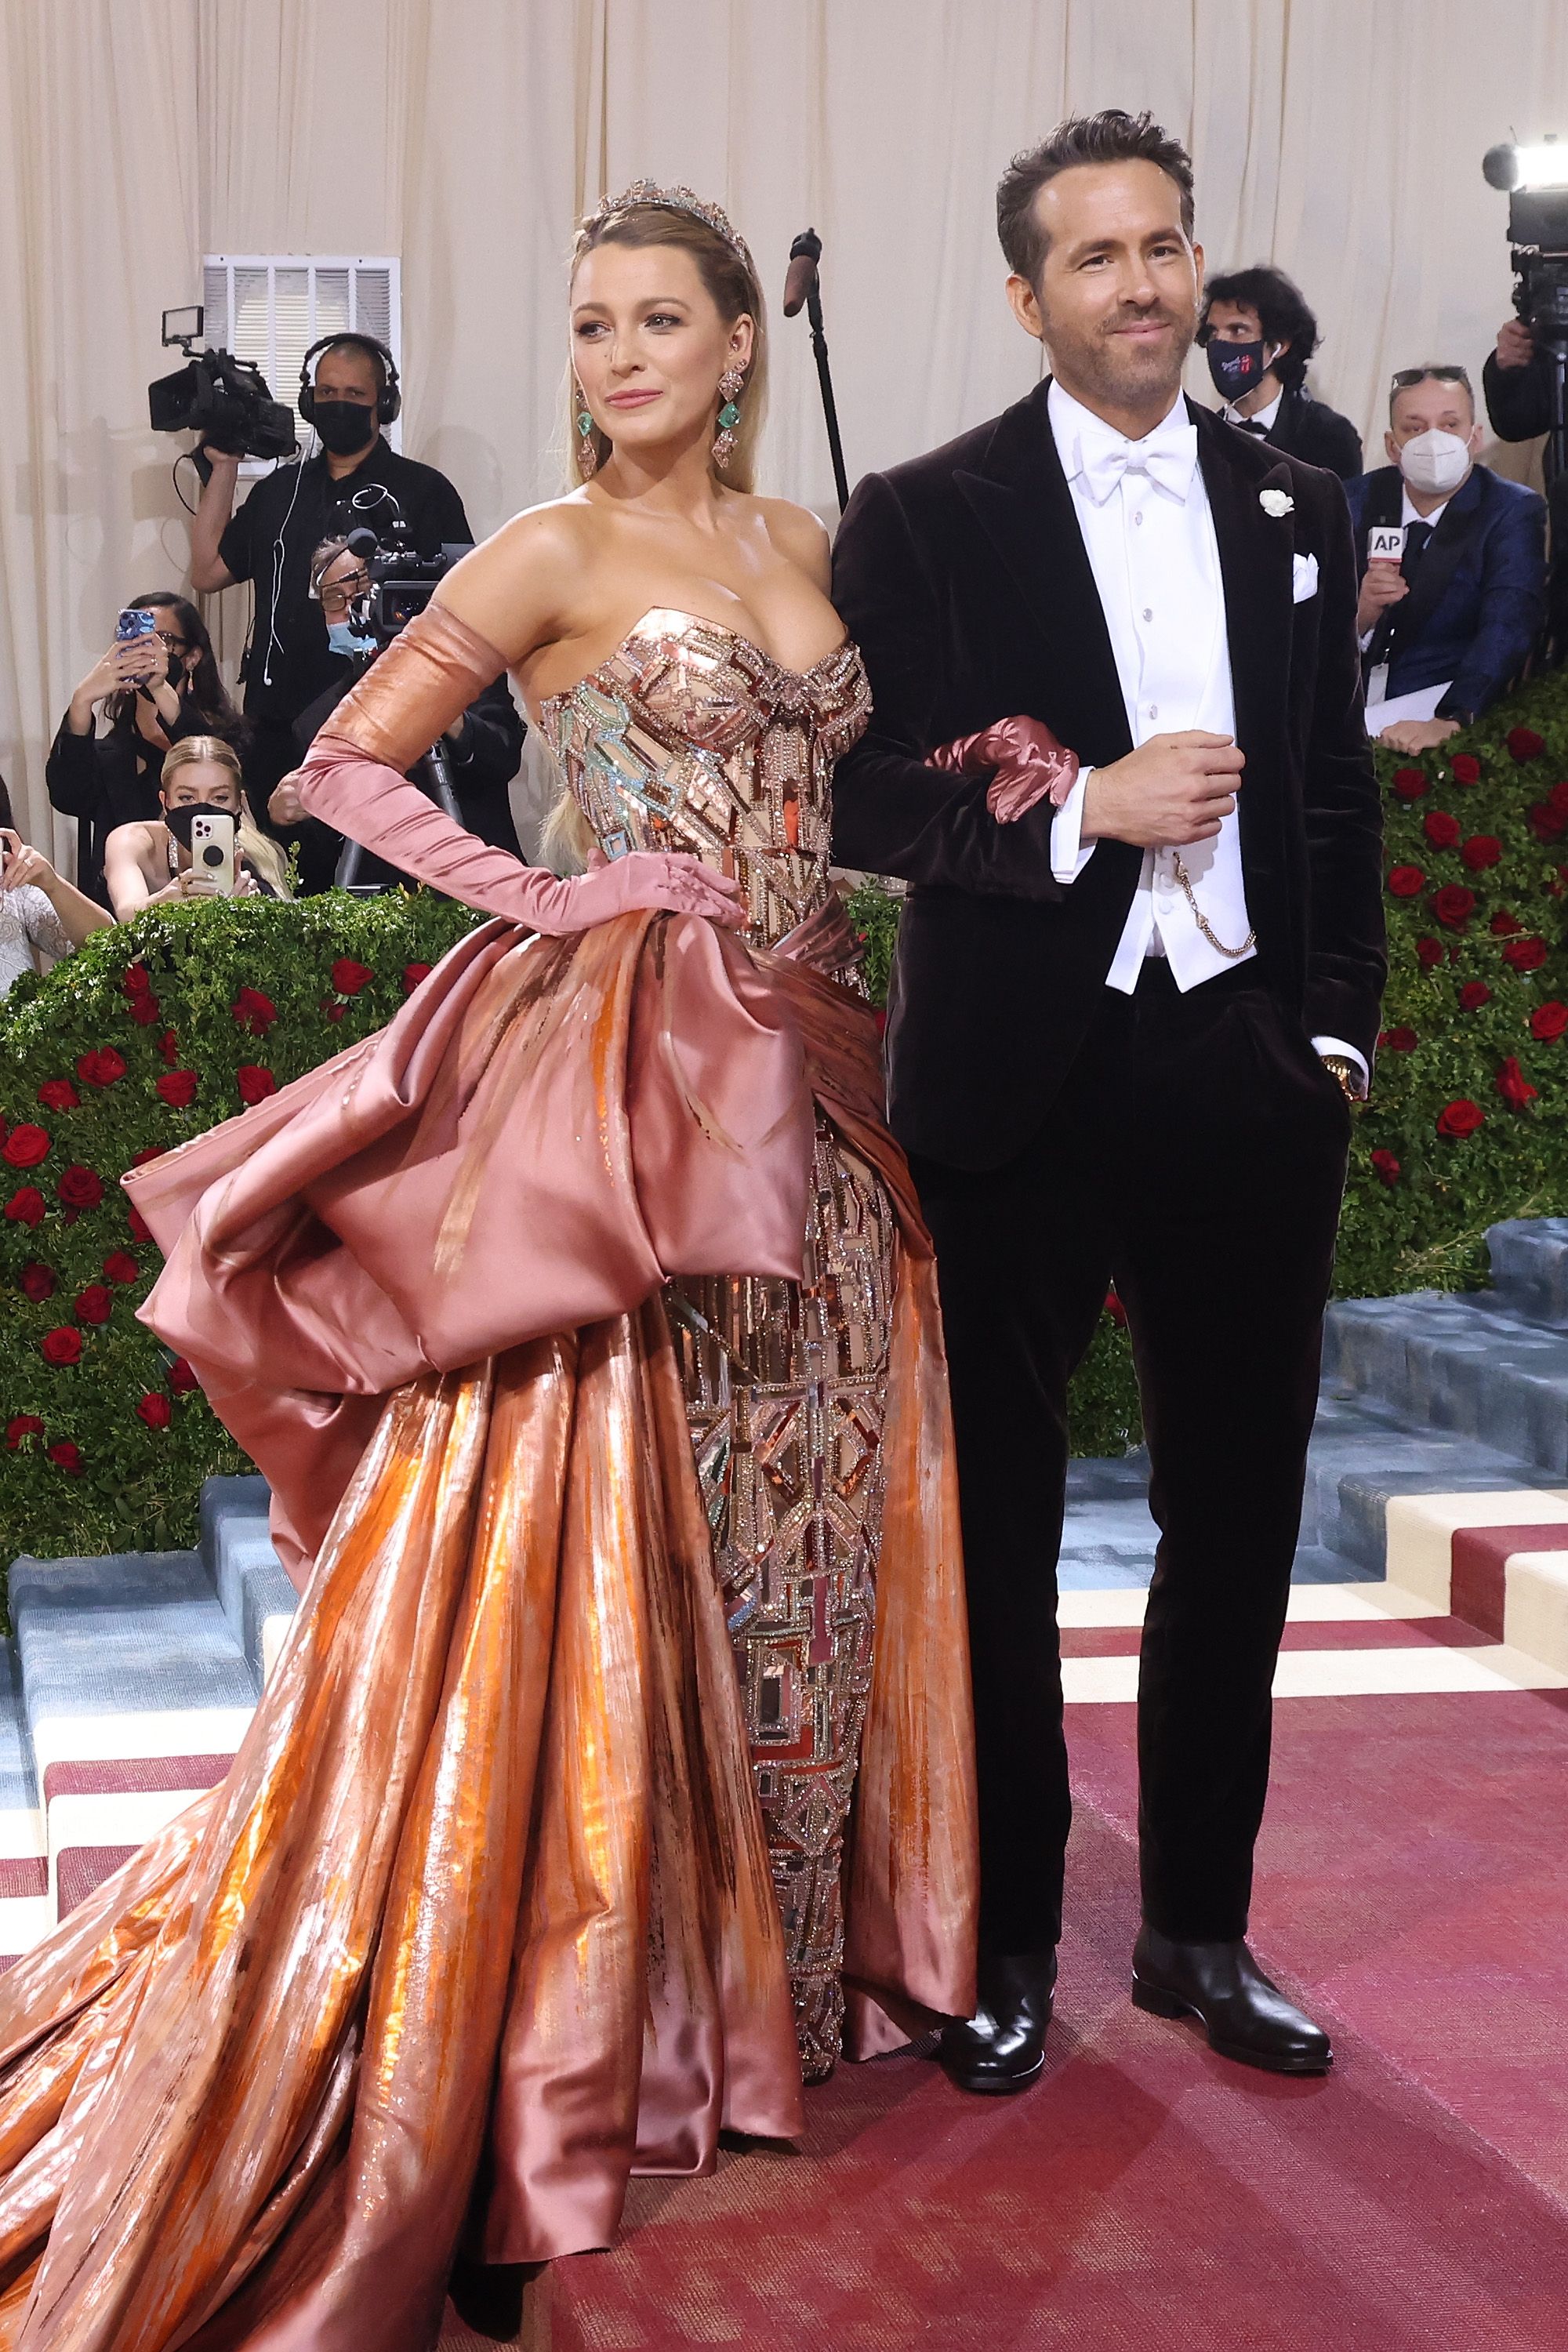 Met Gala 2022 pictures: Celebs looks for 'Gilded glamour' theme